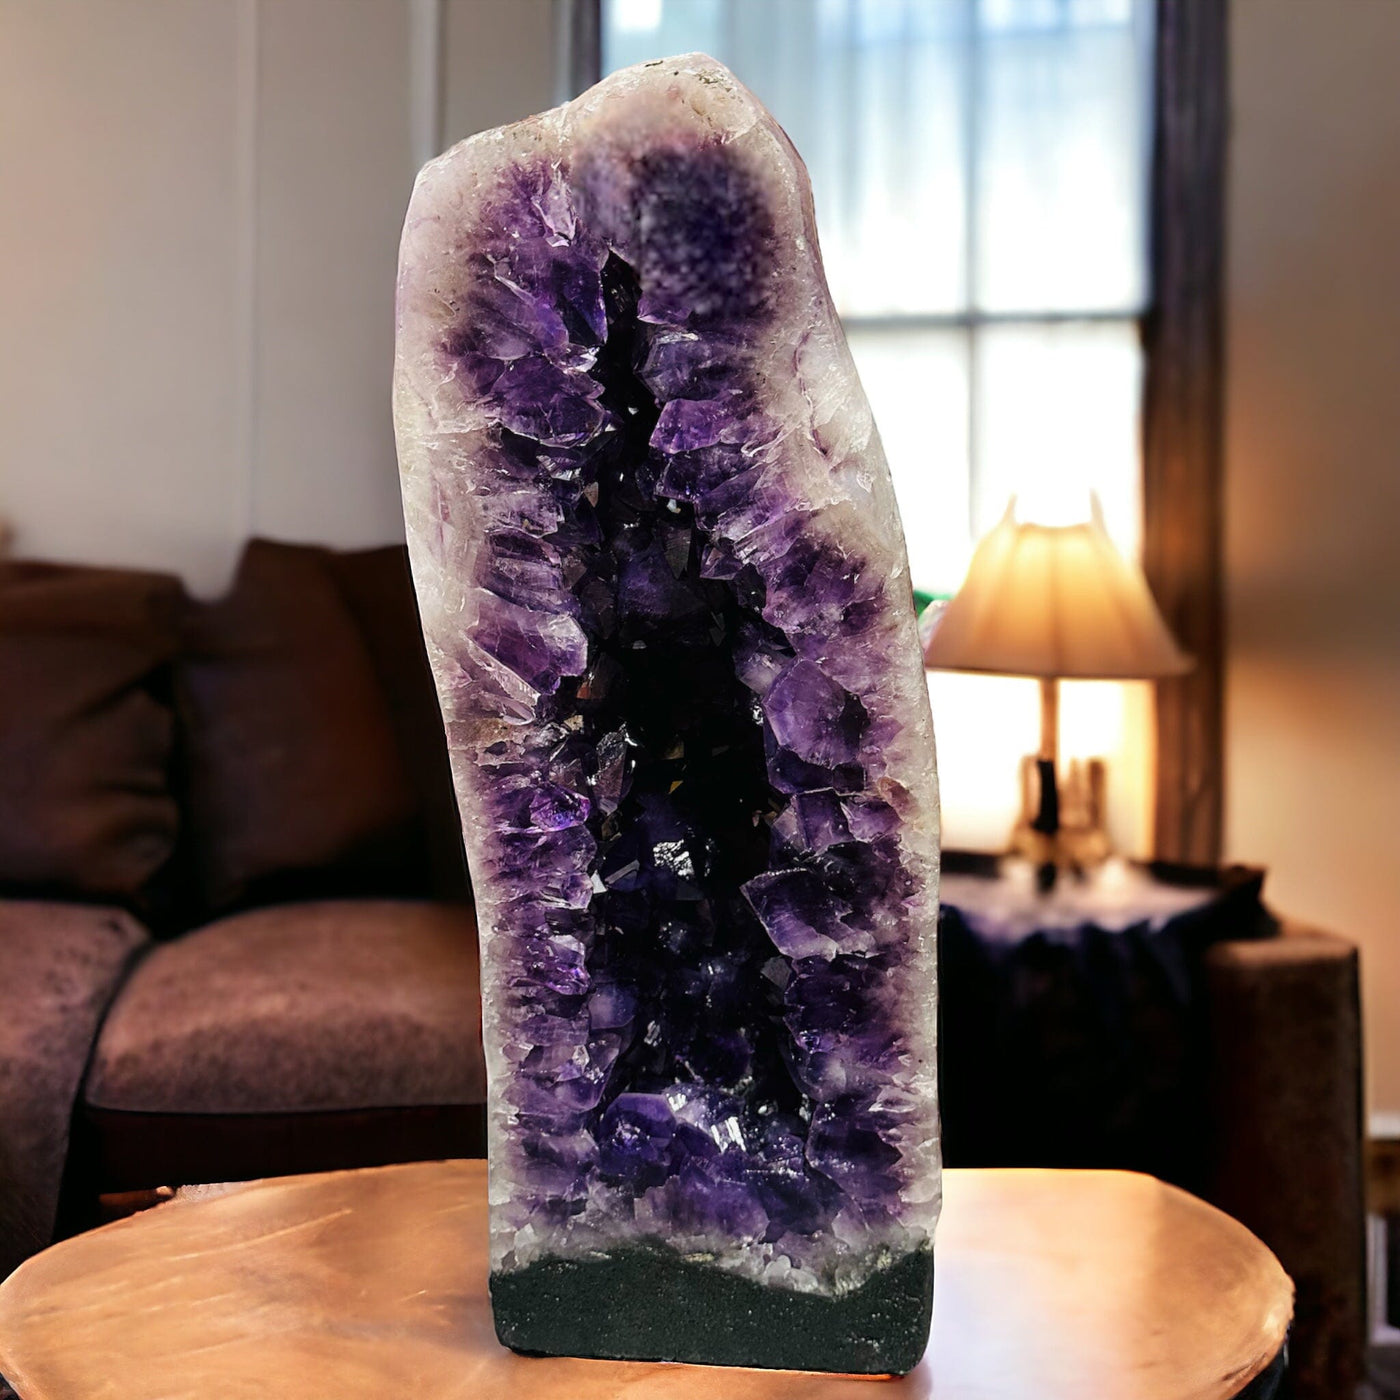 Amethyst Cathedral with a Natural Back - Rare Piece displayed as home decor